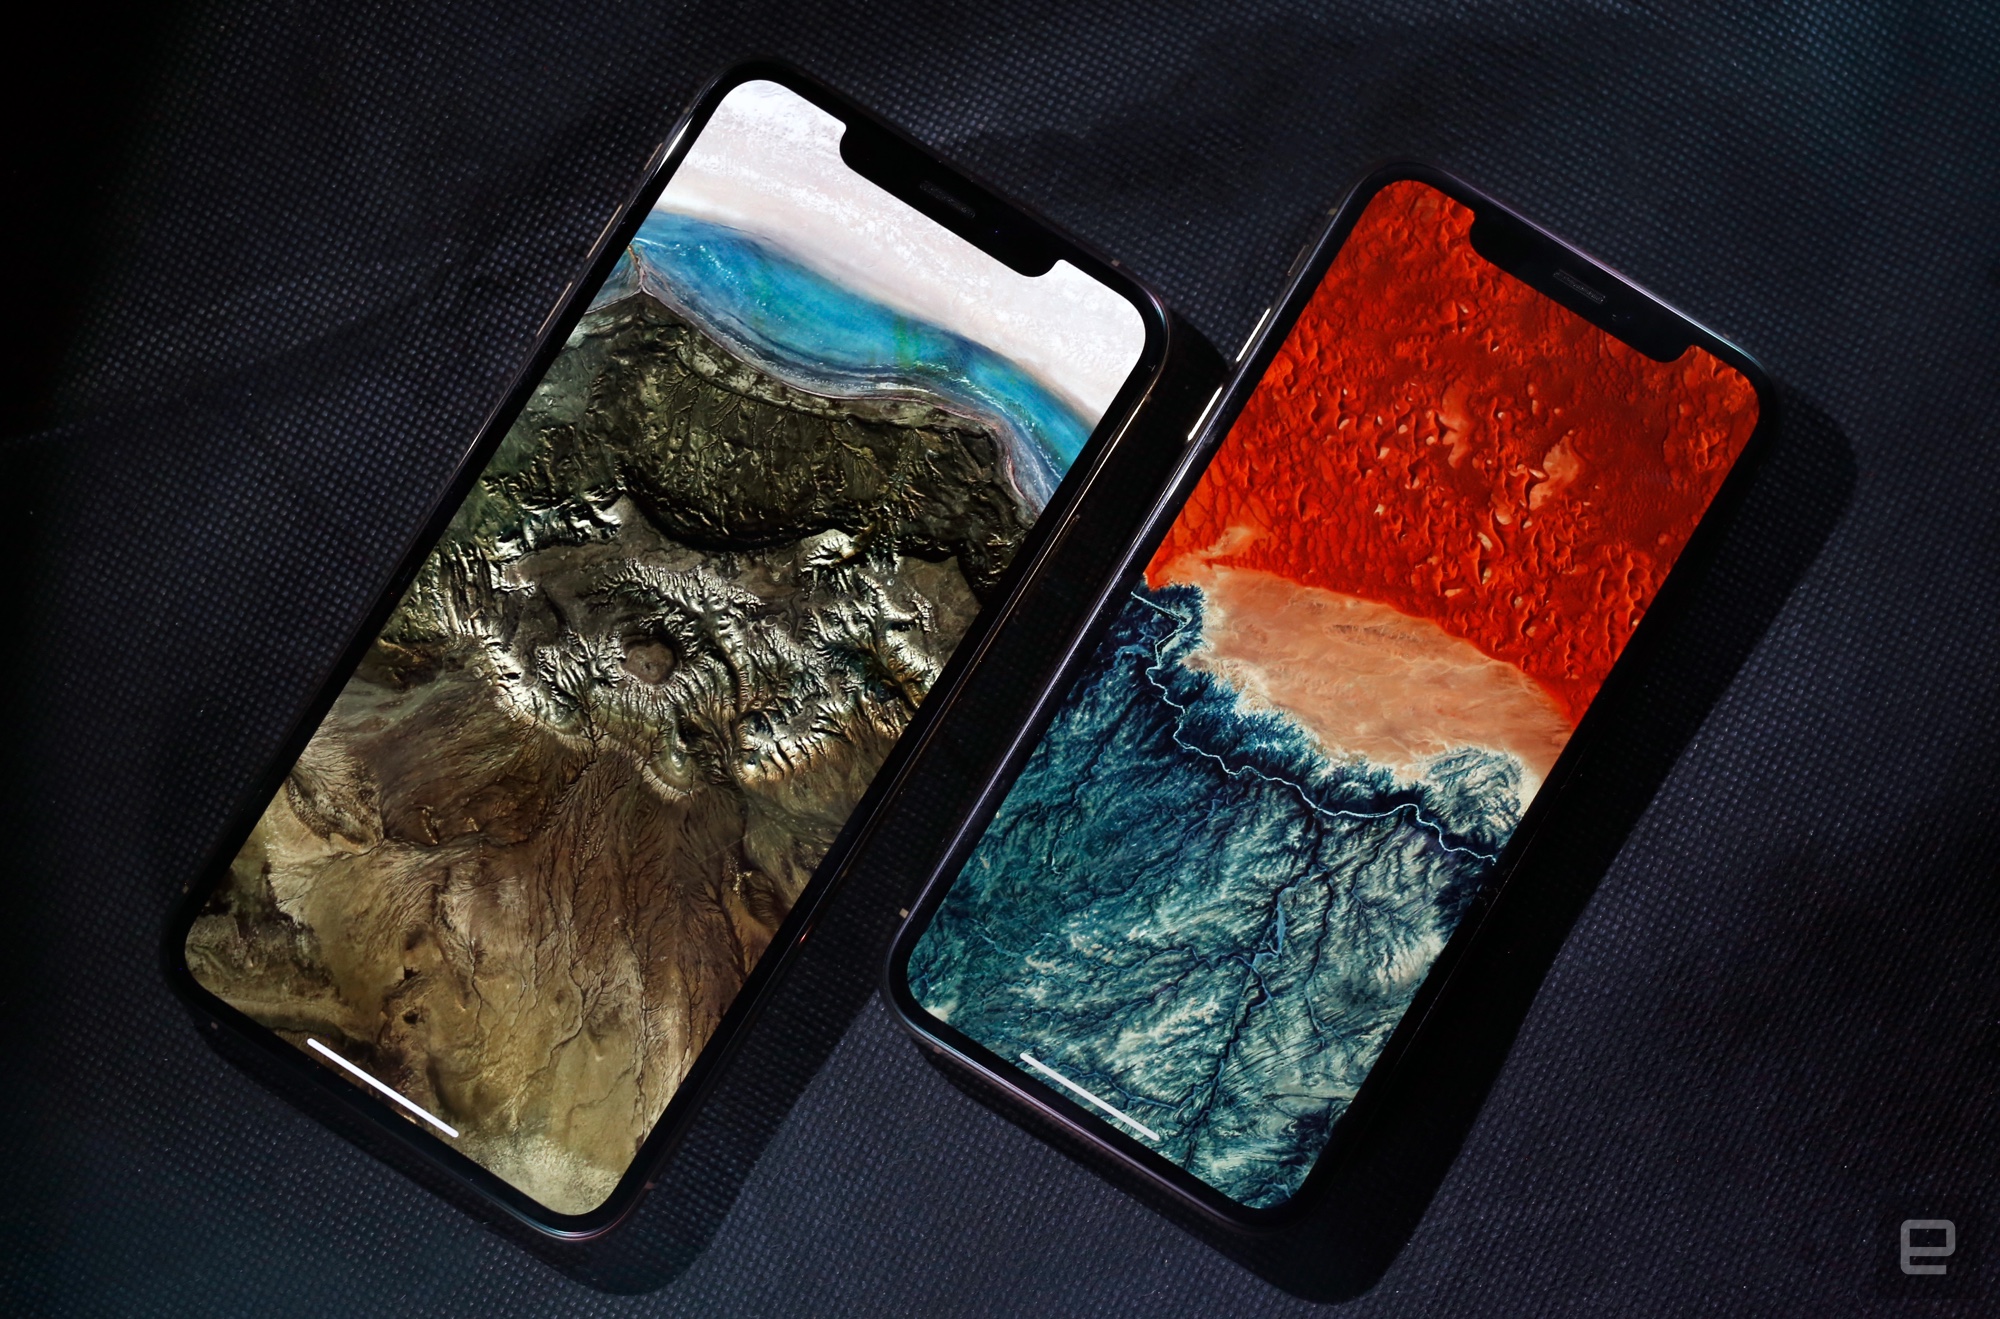 Apple iPhone XS and XS Max review: Pricey but future-proof